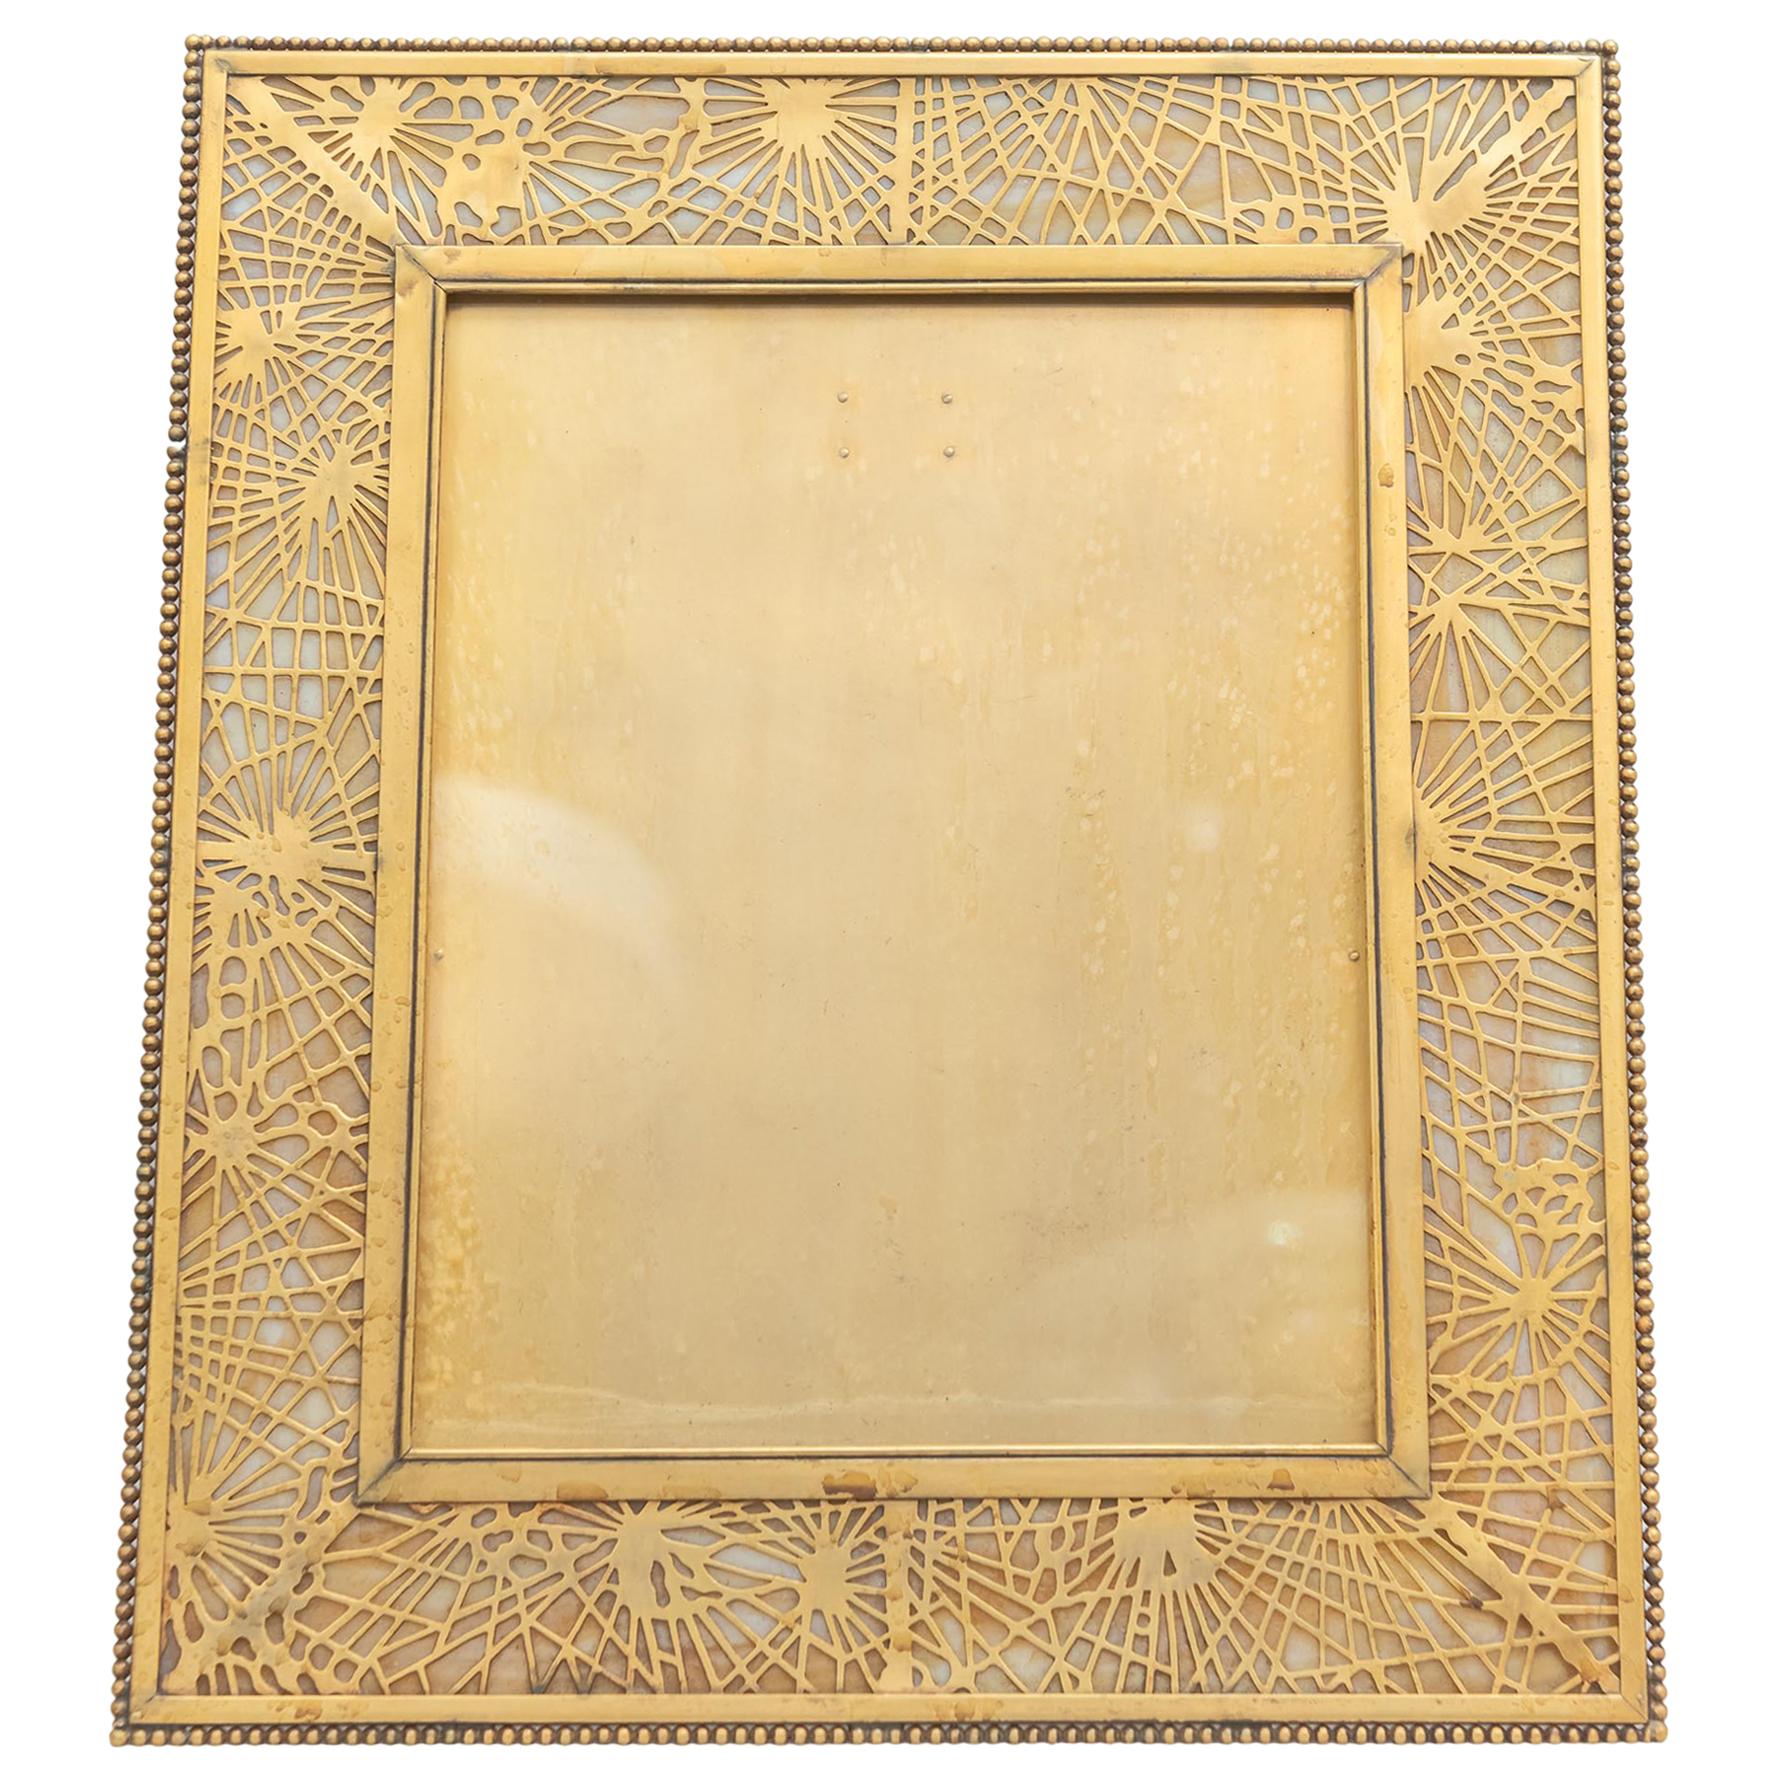 Very Large Tiffany Studios Pine Needle Picture Frame in Gilt Metal and Glass